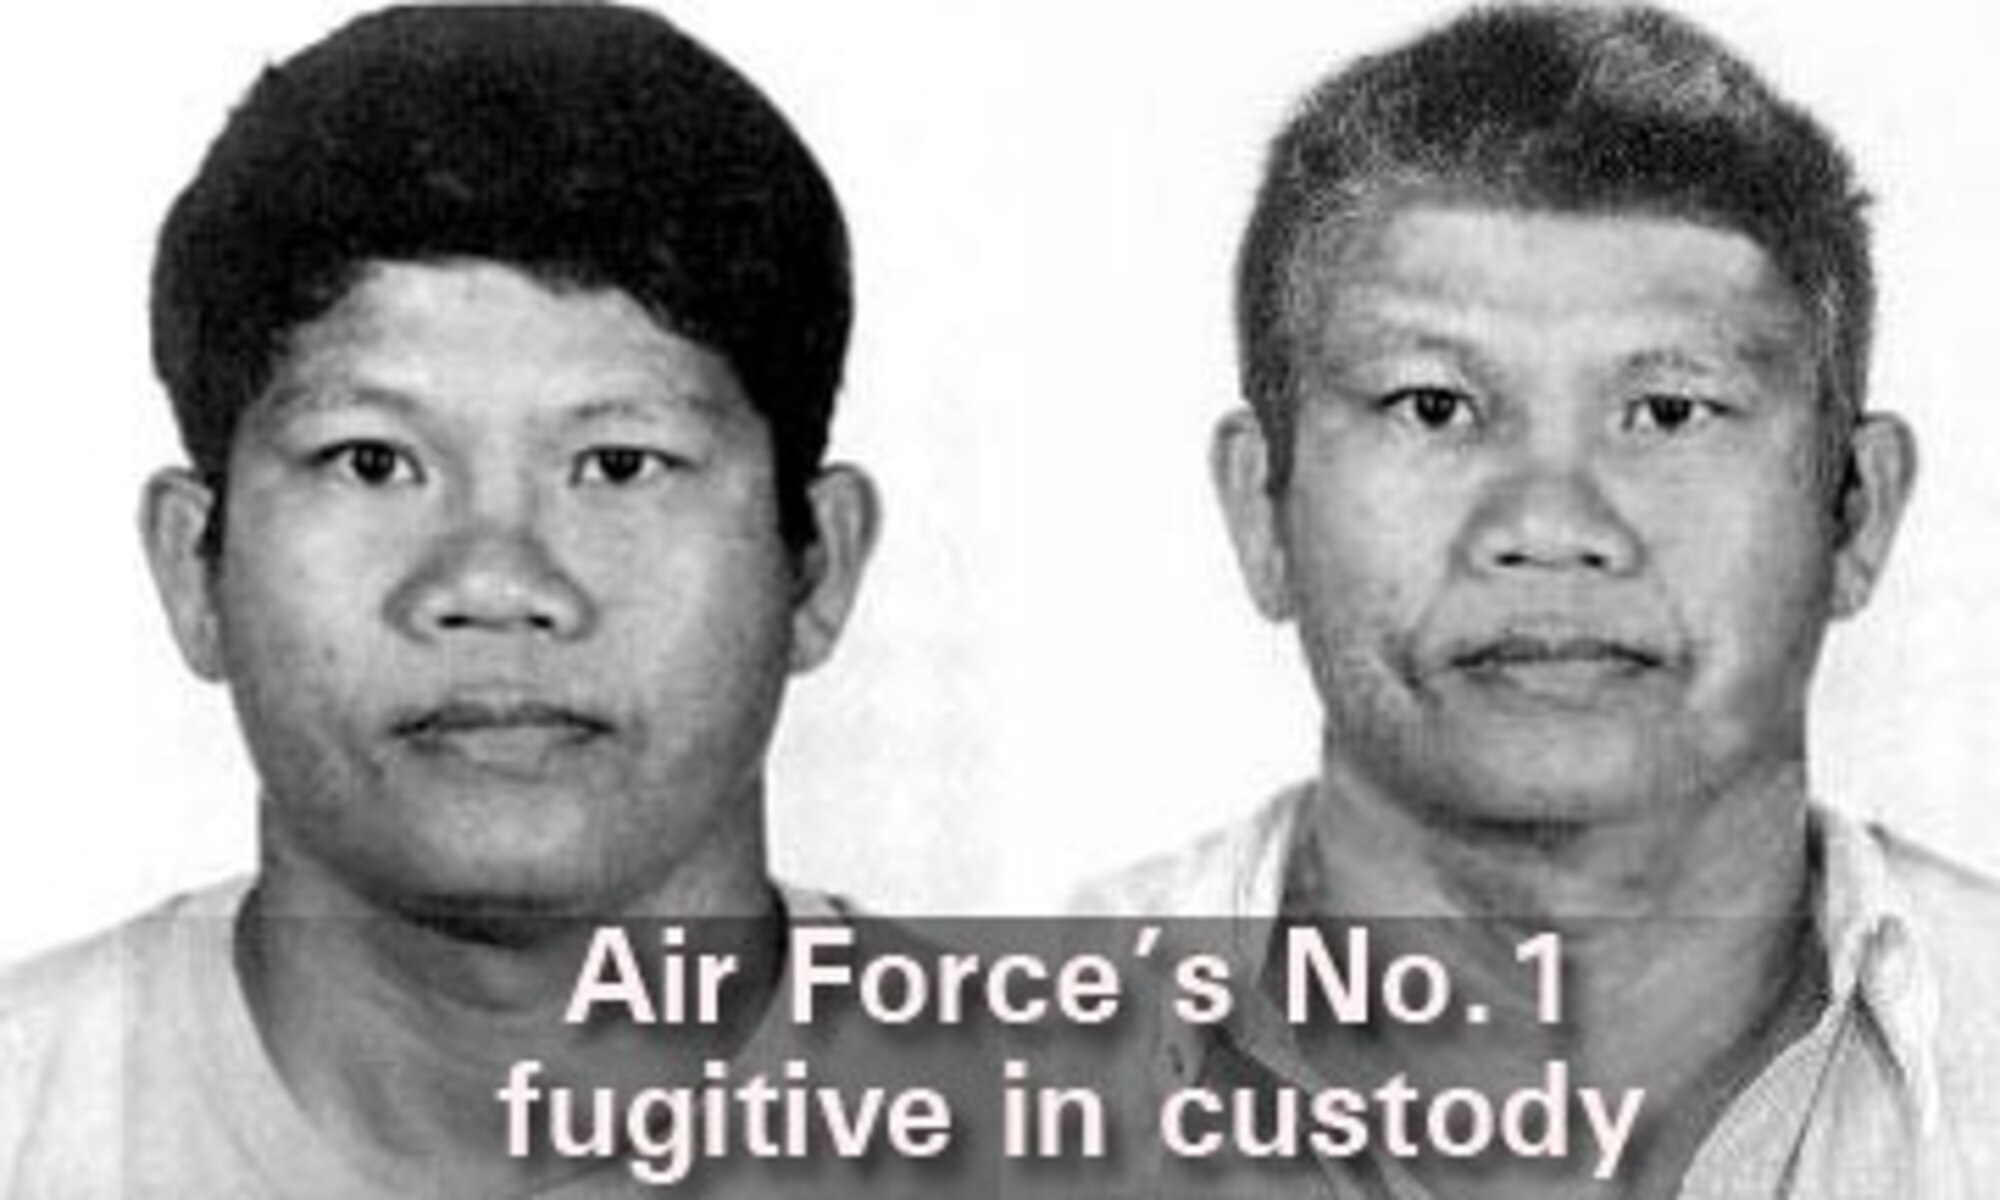 Saner Wongun is shown in 1994, left, and in an age-progression image that led to his eventual capture. (U.S. Air Force illustration)